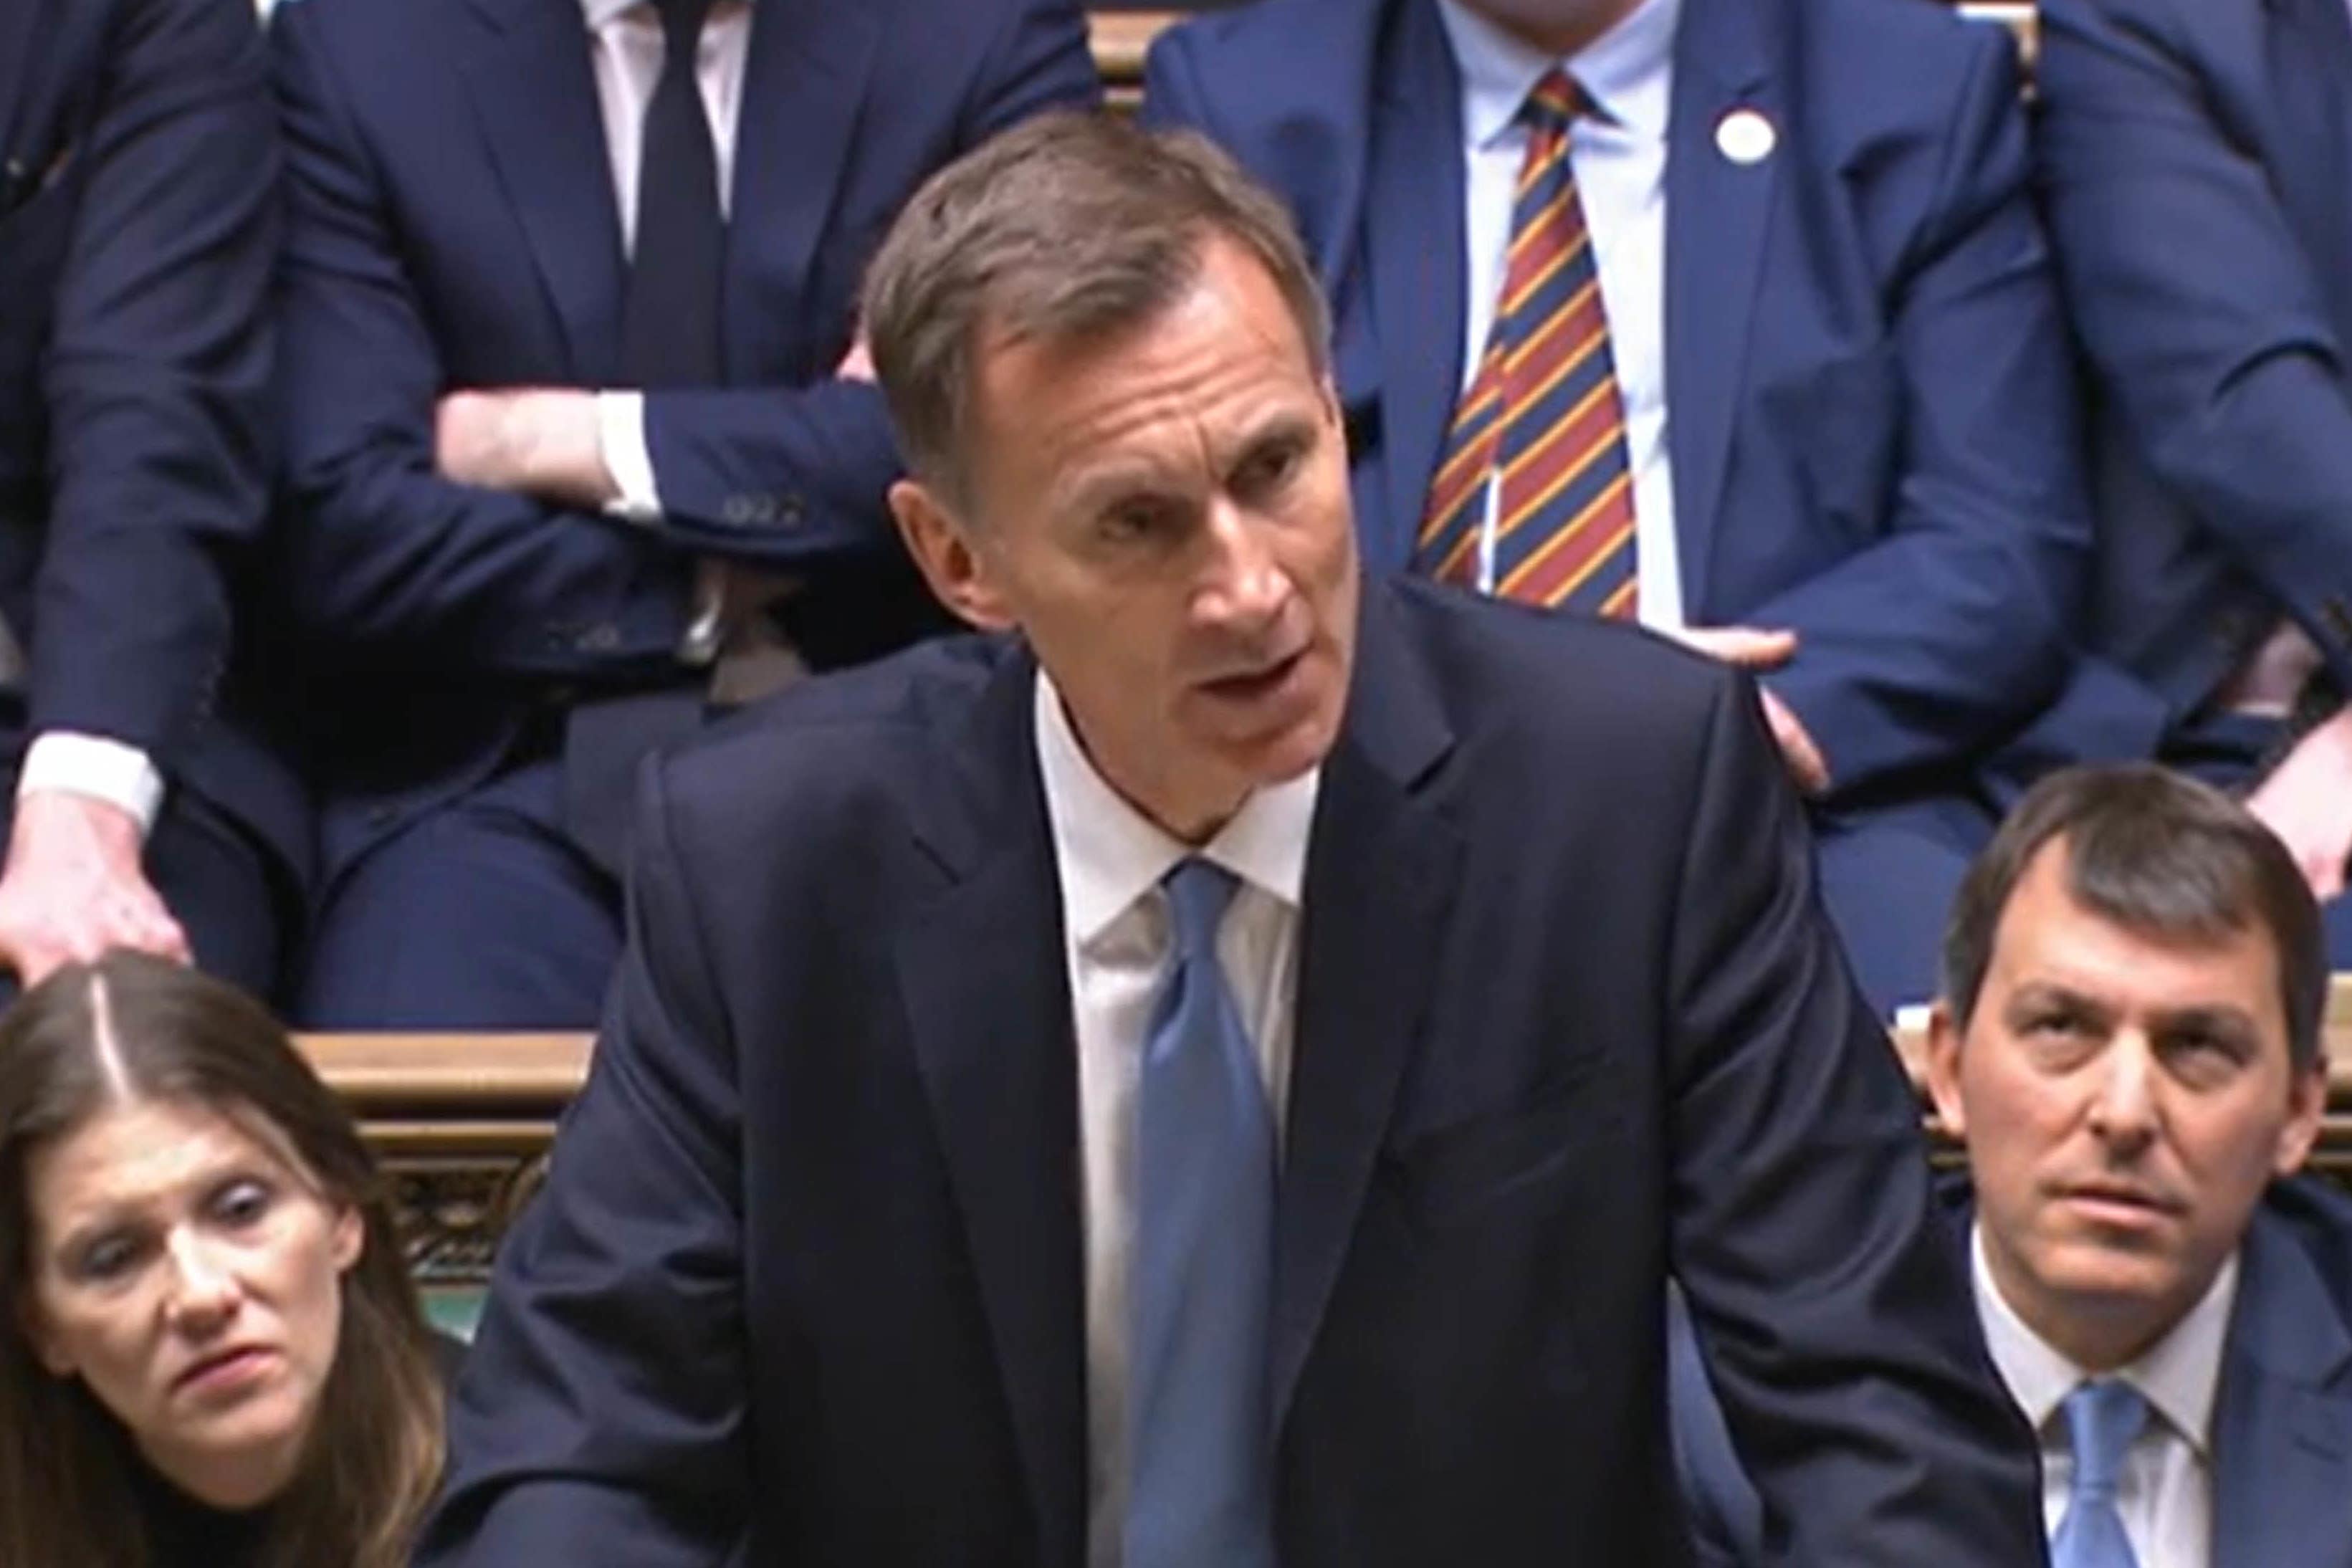 Chancellor of the Exchequer Jeremy Hunt delivering his Budget to the House of Commons